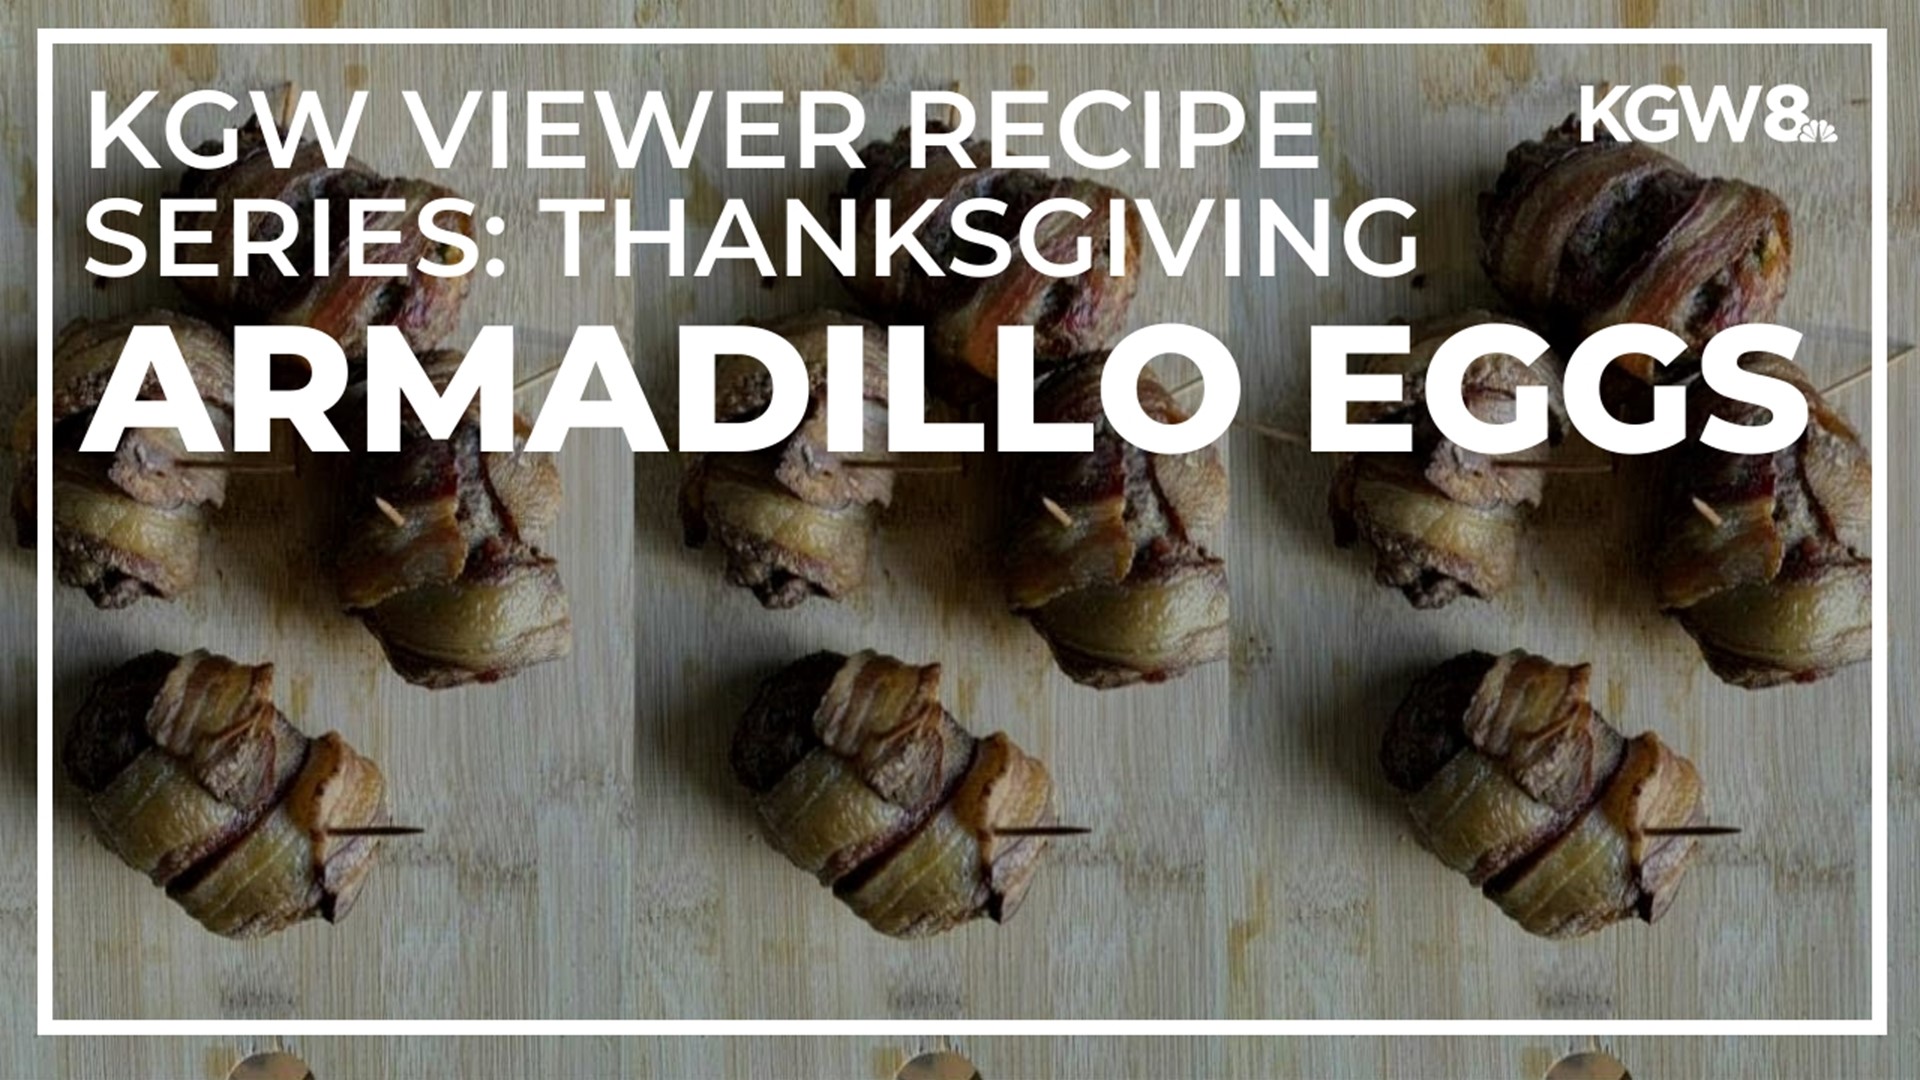 Willie in West Linn shares his Thanksgiving recipe for "Armadillo Eggs," but fair warning: the name of his recipe does not accurately describe what it really is!